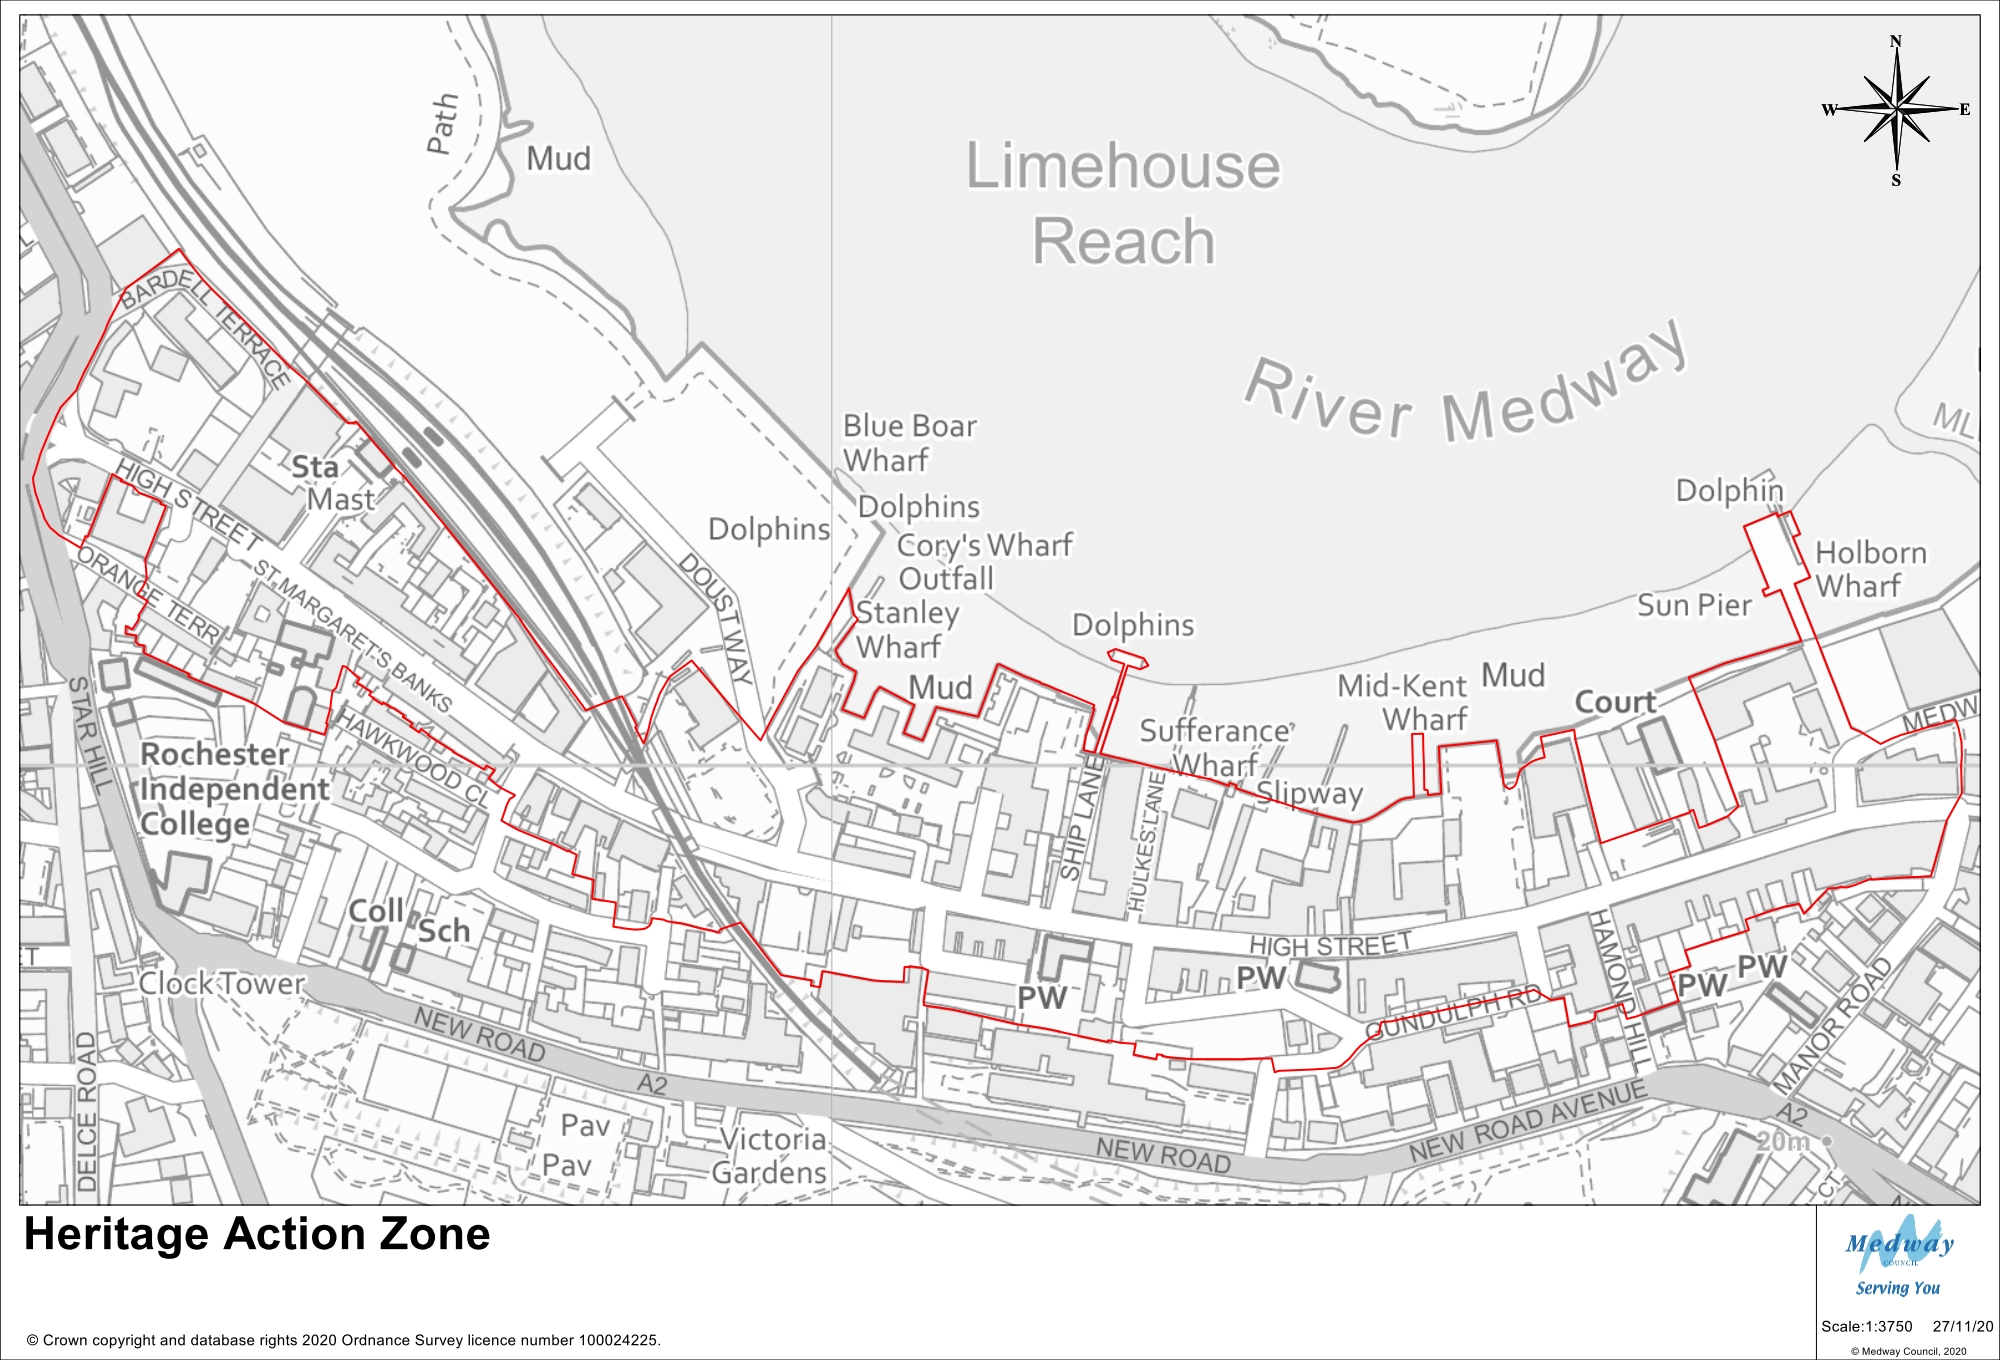 The Heritage Action Zone is the High Street between Chatham (Manor Road) and Rochester (Star Hill). It includes Sun Pier and the wharves on the river side and extends up towards New Road.